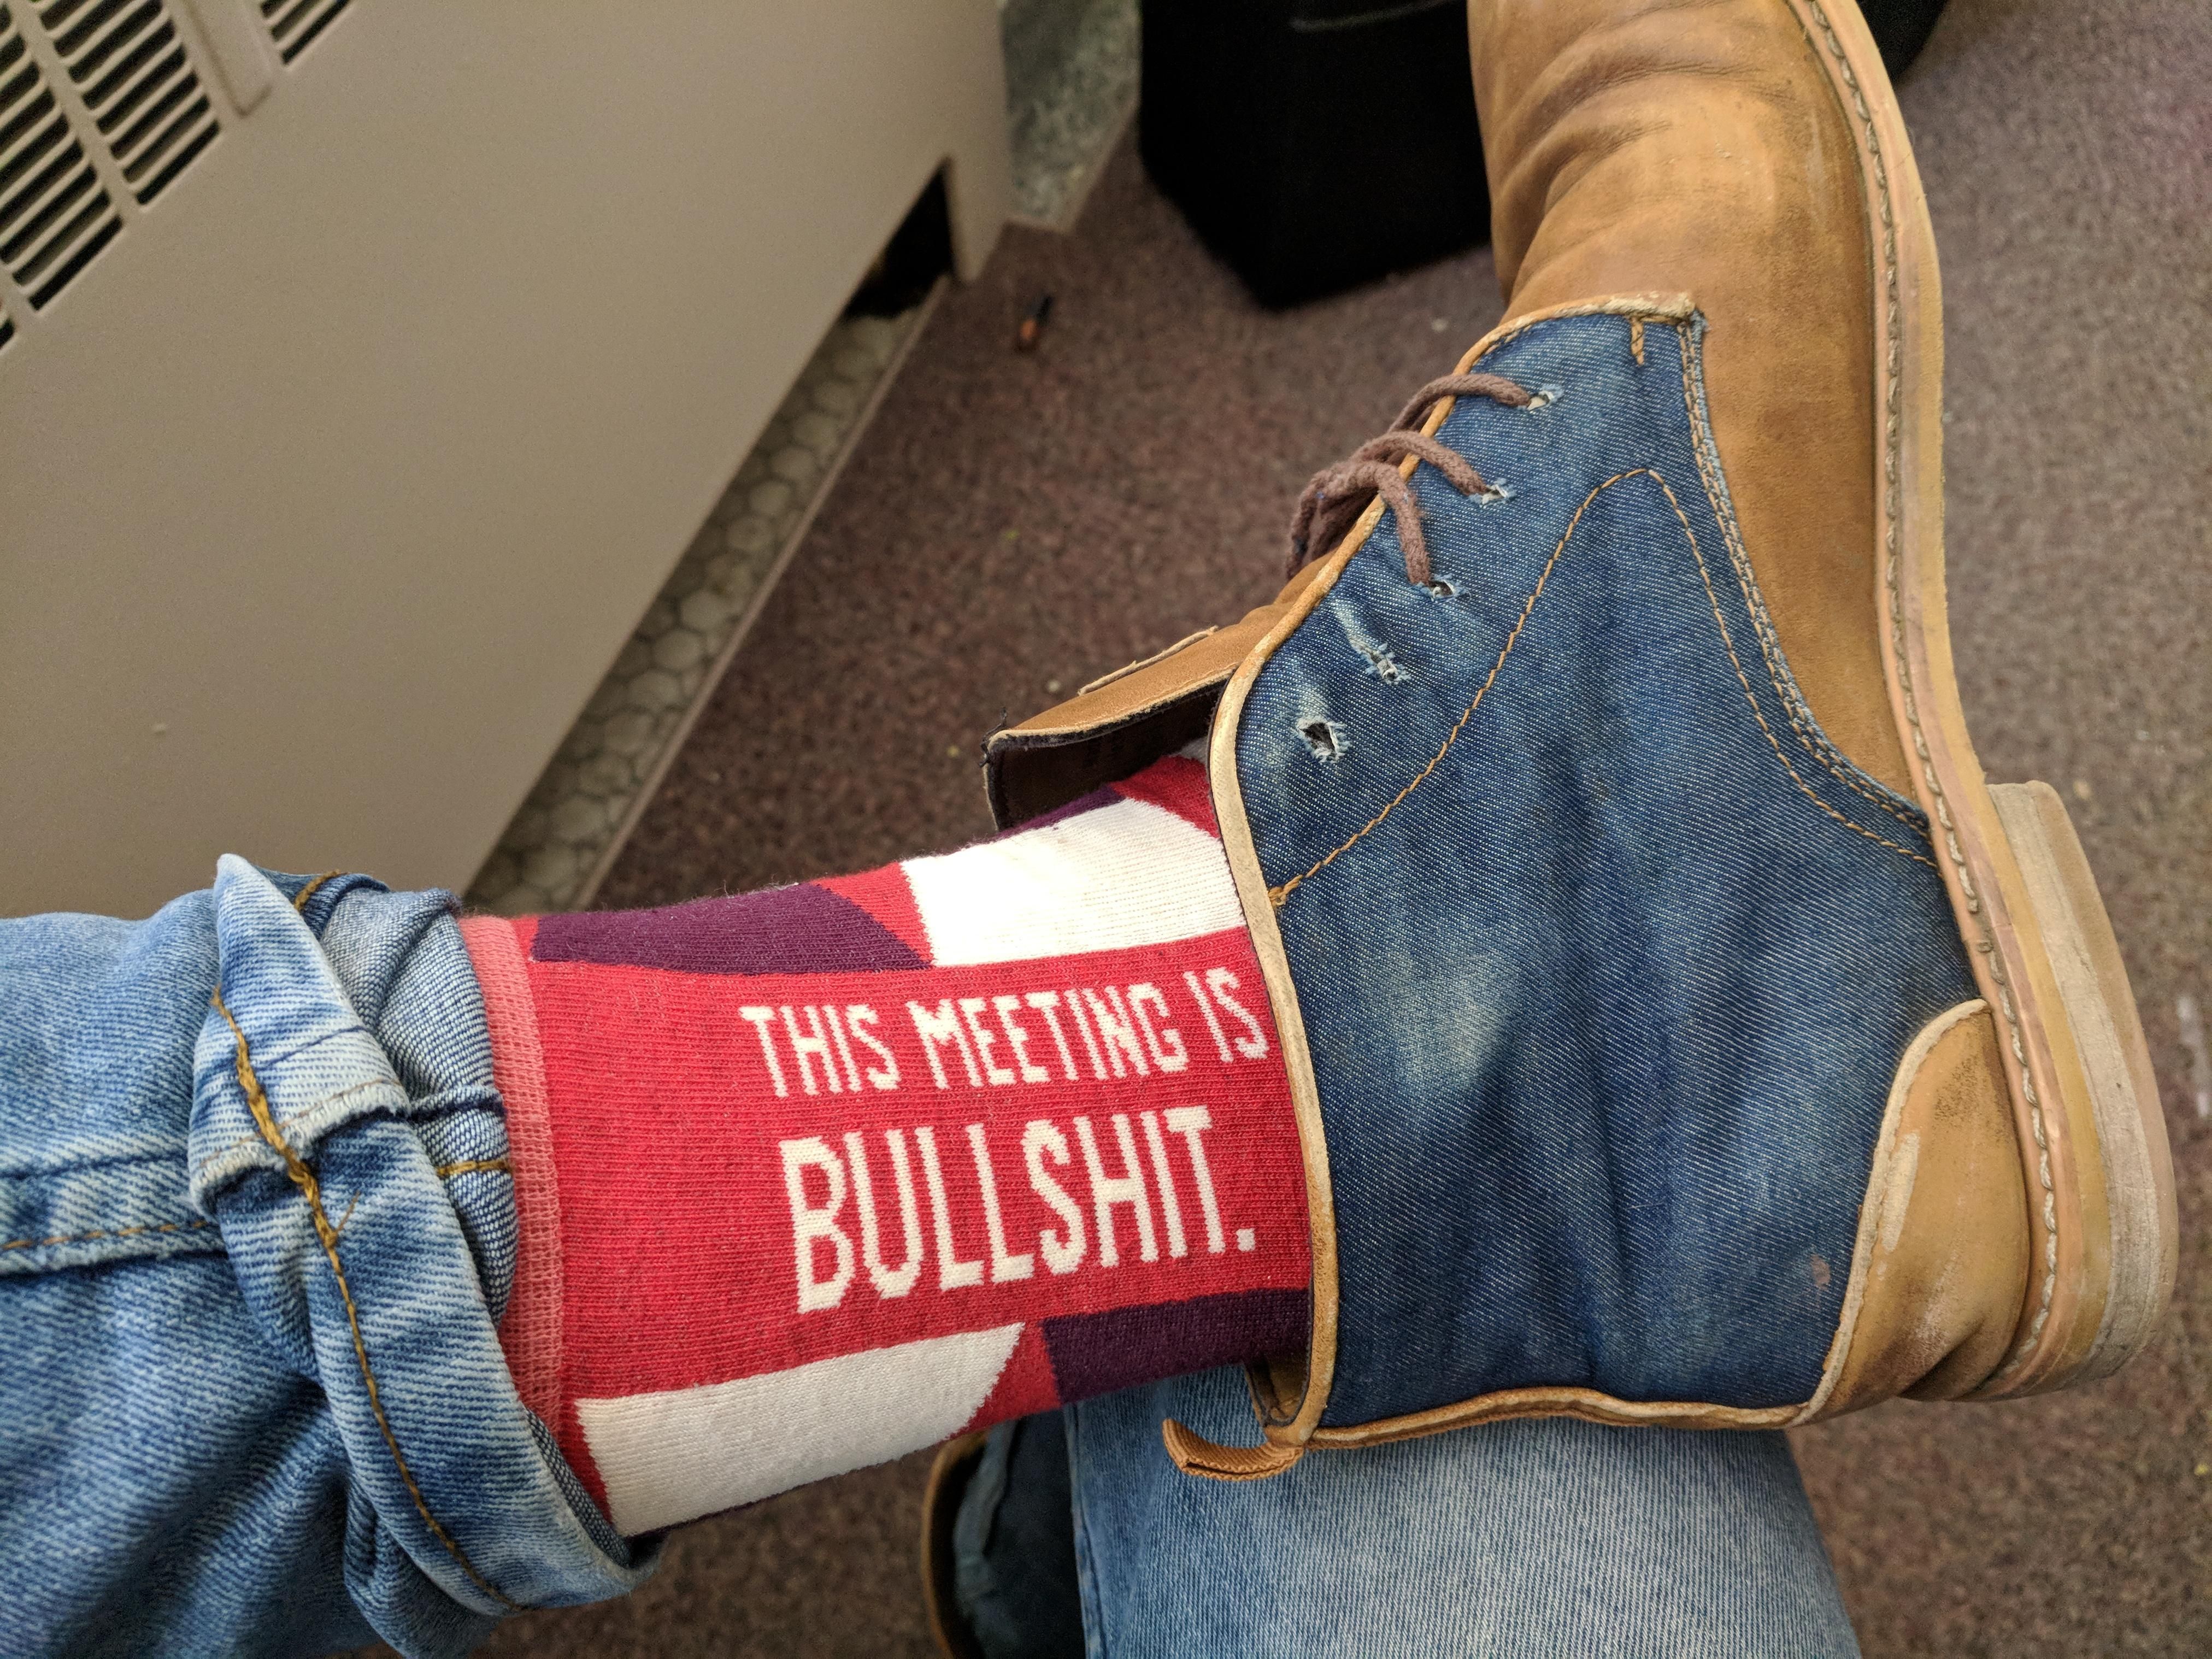 I had to attend a long and boring meeting today. This was my rebellion.